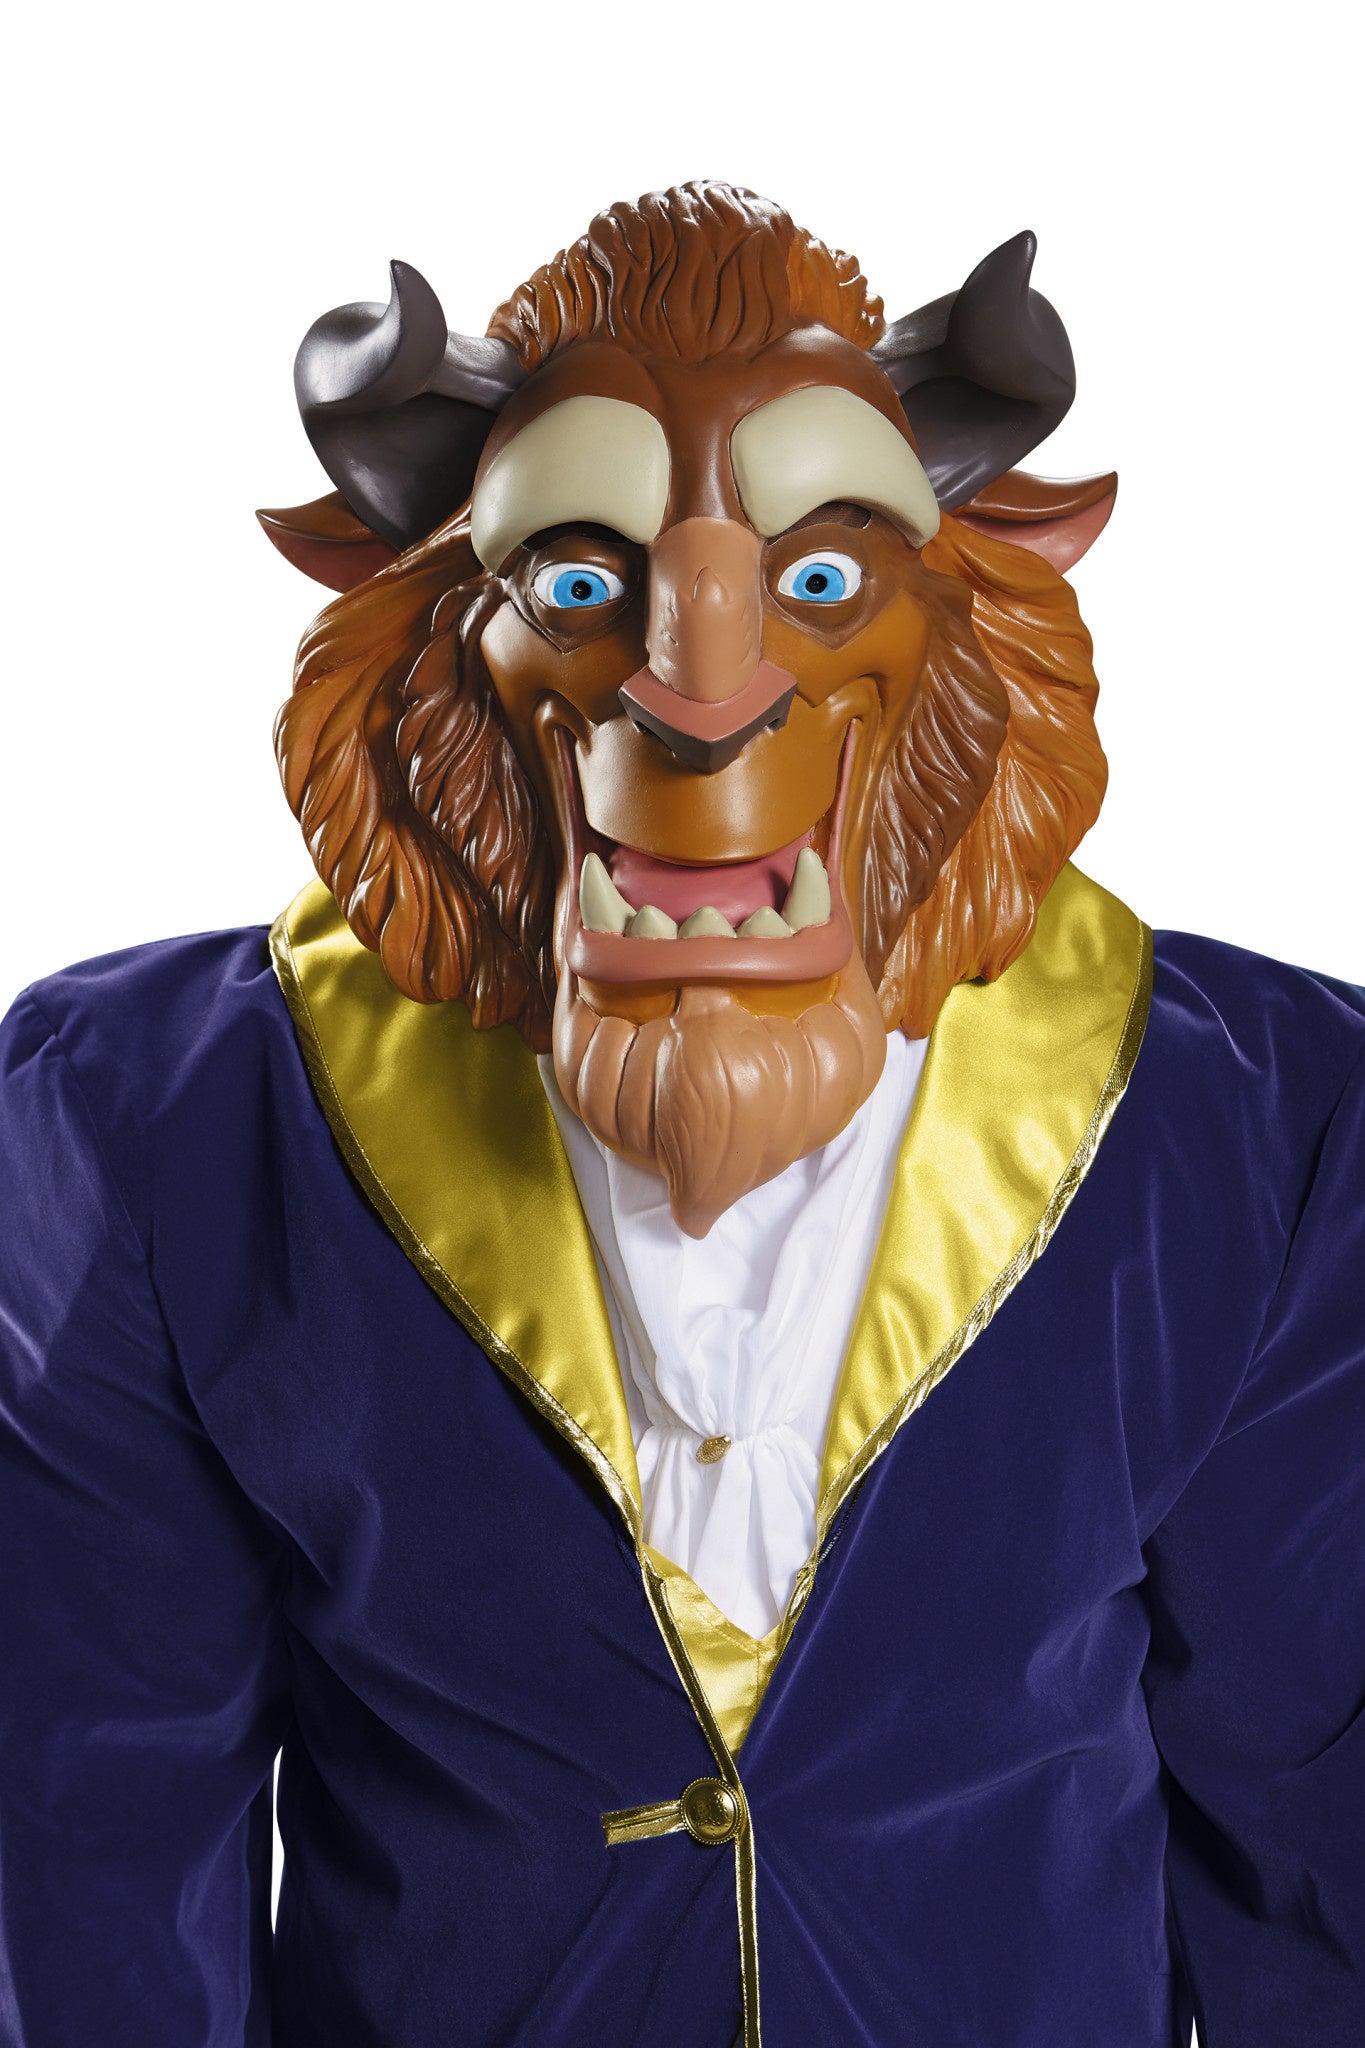 Deluxe Beast Latex Mask (Beauty And The Beast)